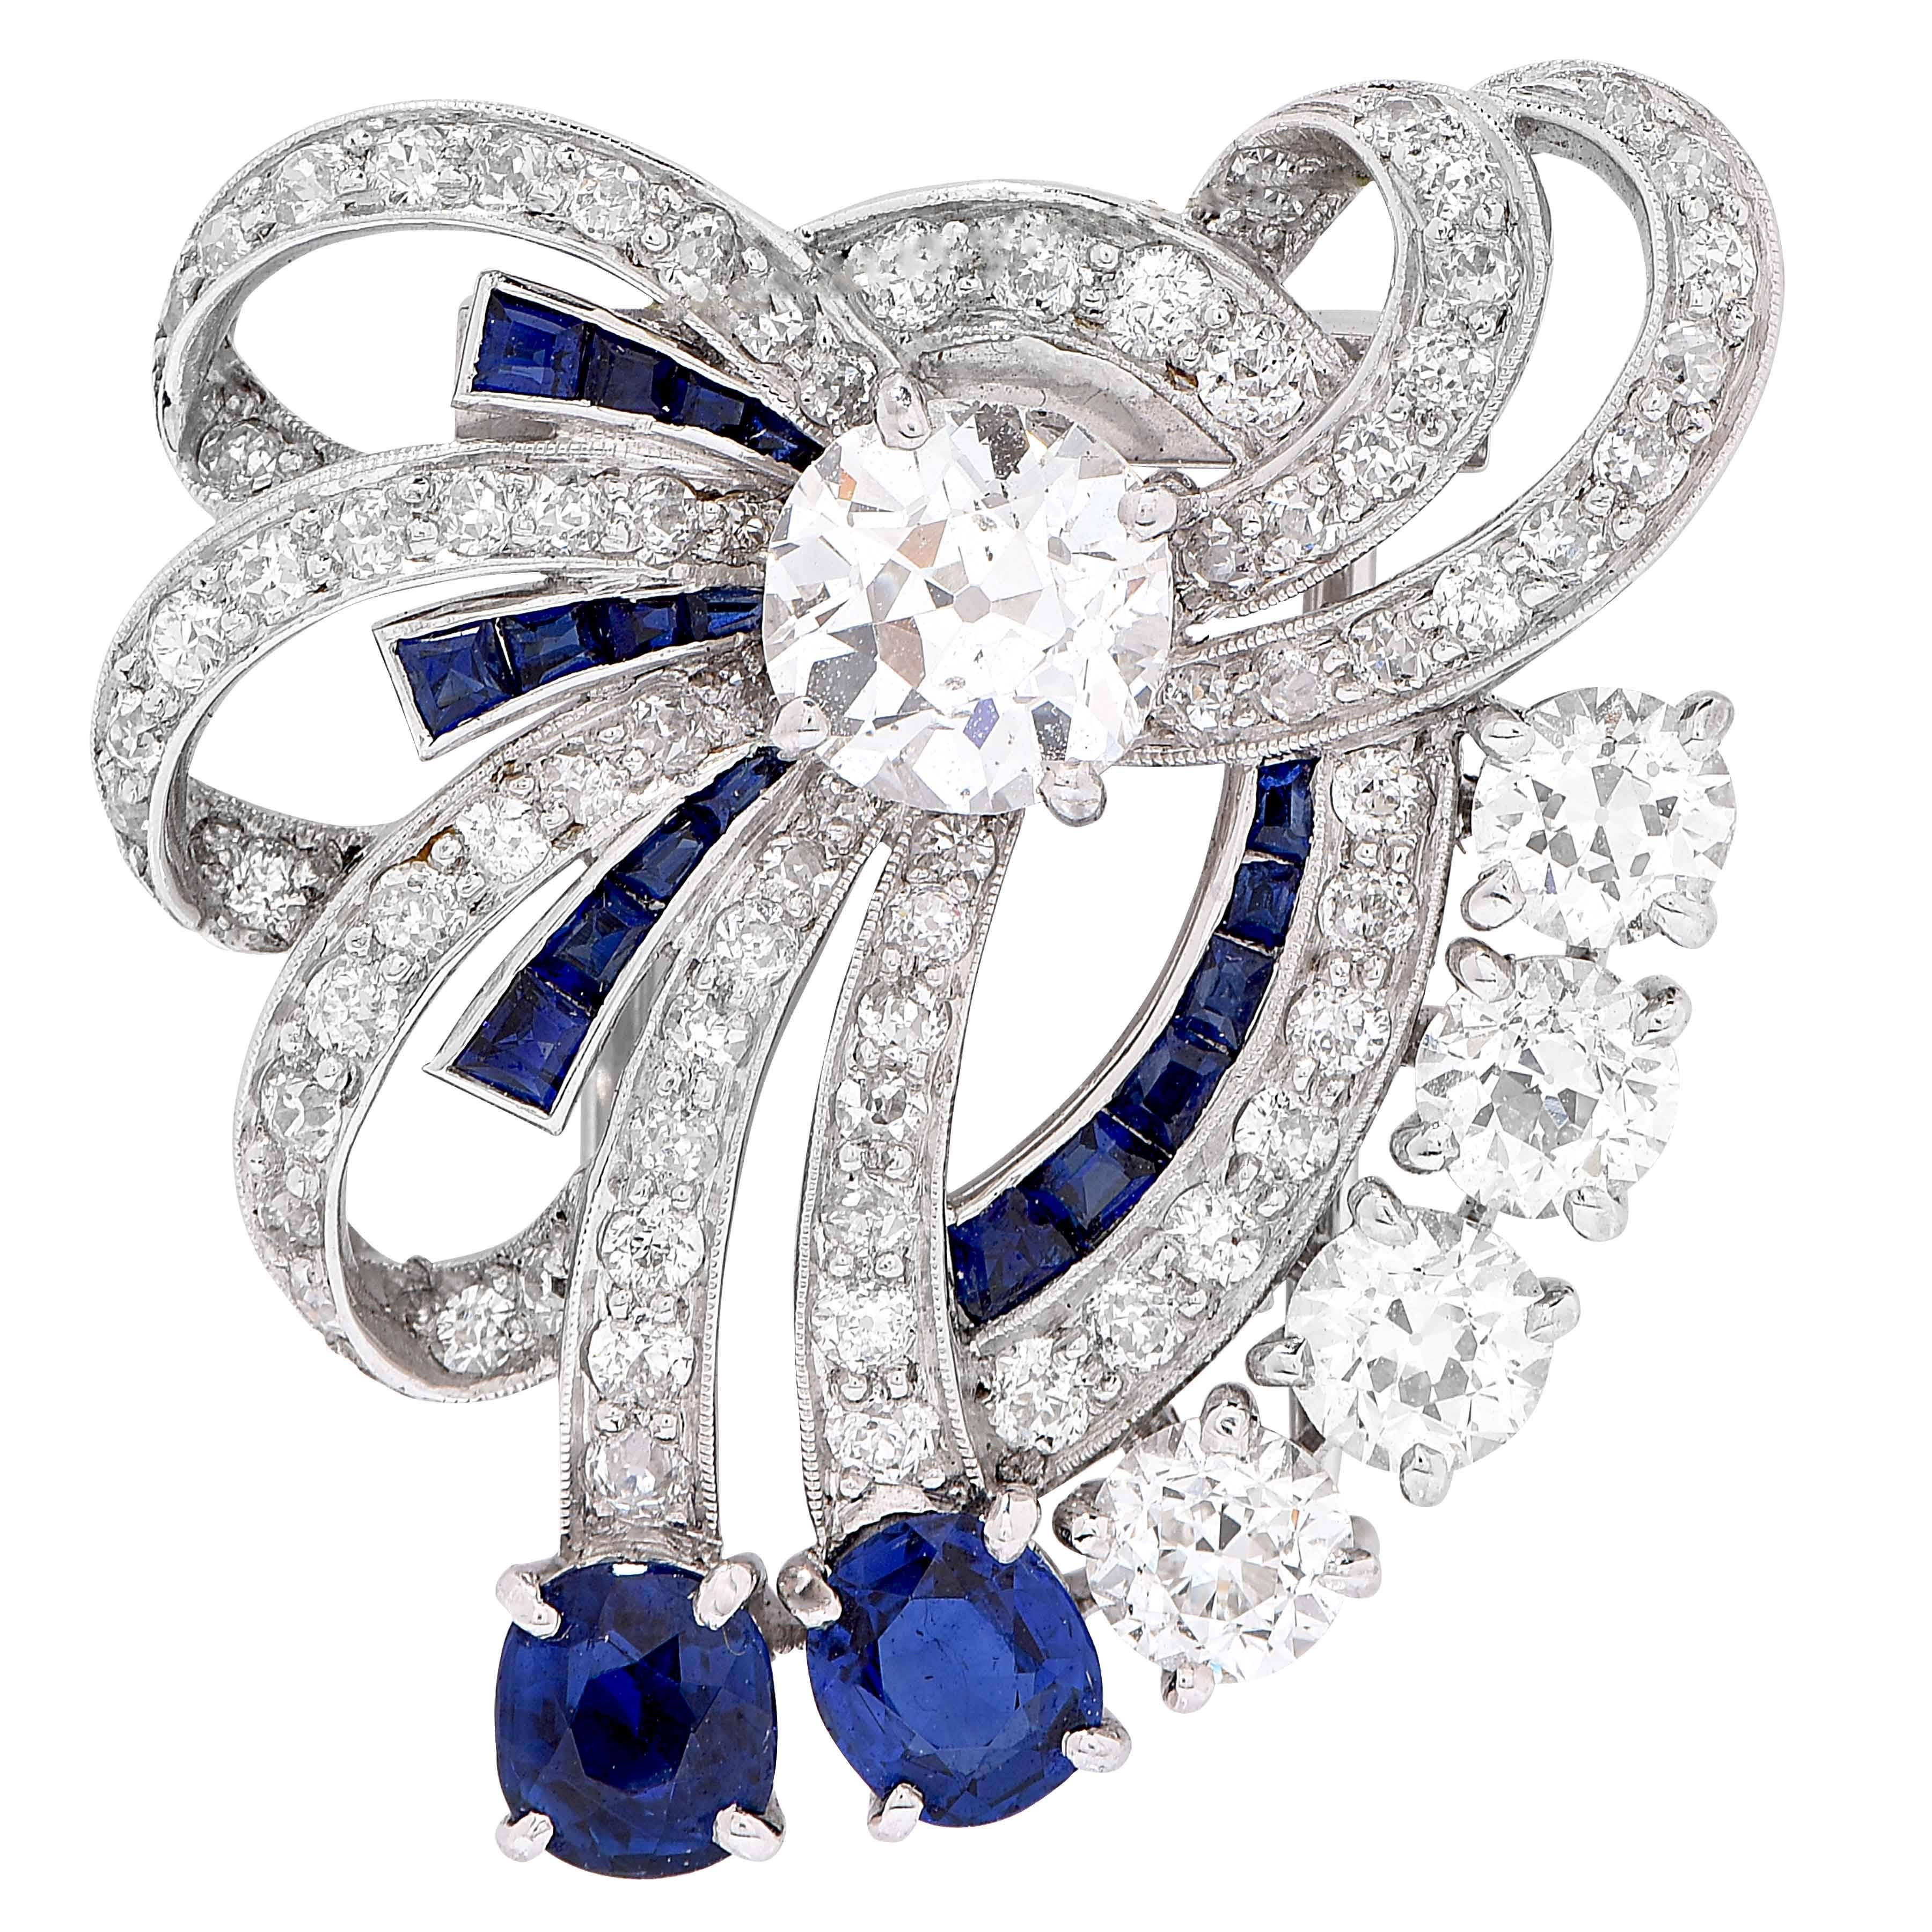 Gorgeous Yard Sapphire and Diamond Platinum Bow Clip. The stylized bow is centered on one old-mine cut diamond weighing approximately 1.25 carats, further set with 75 Old European and single cut diamonds weighing an additional 2.35 carats. There are